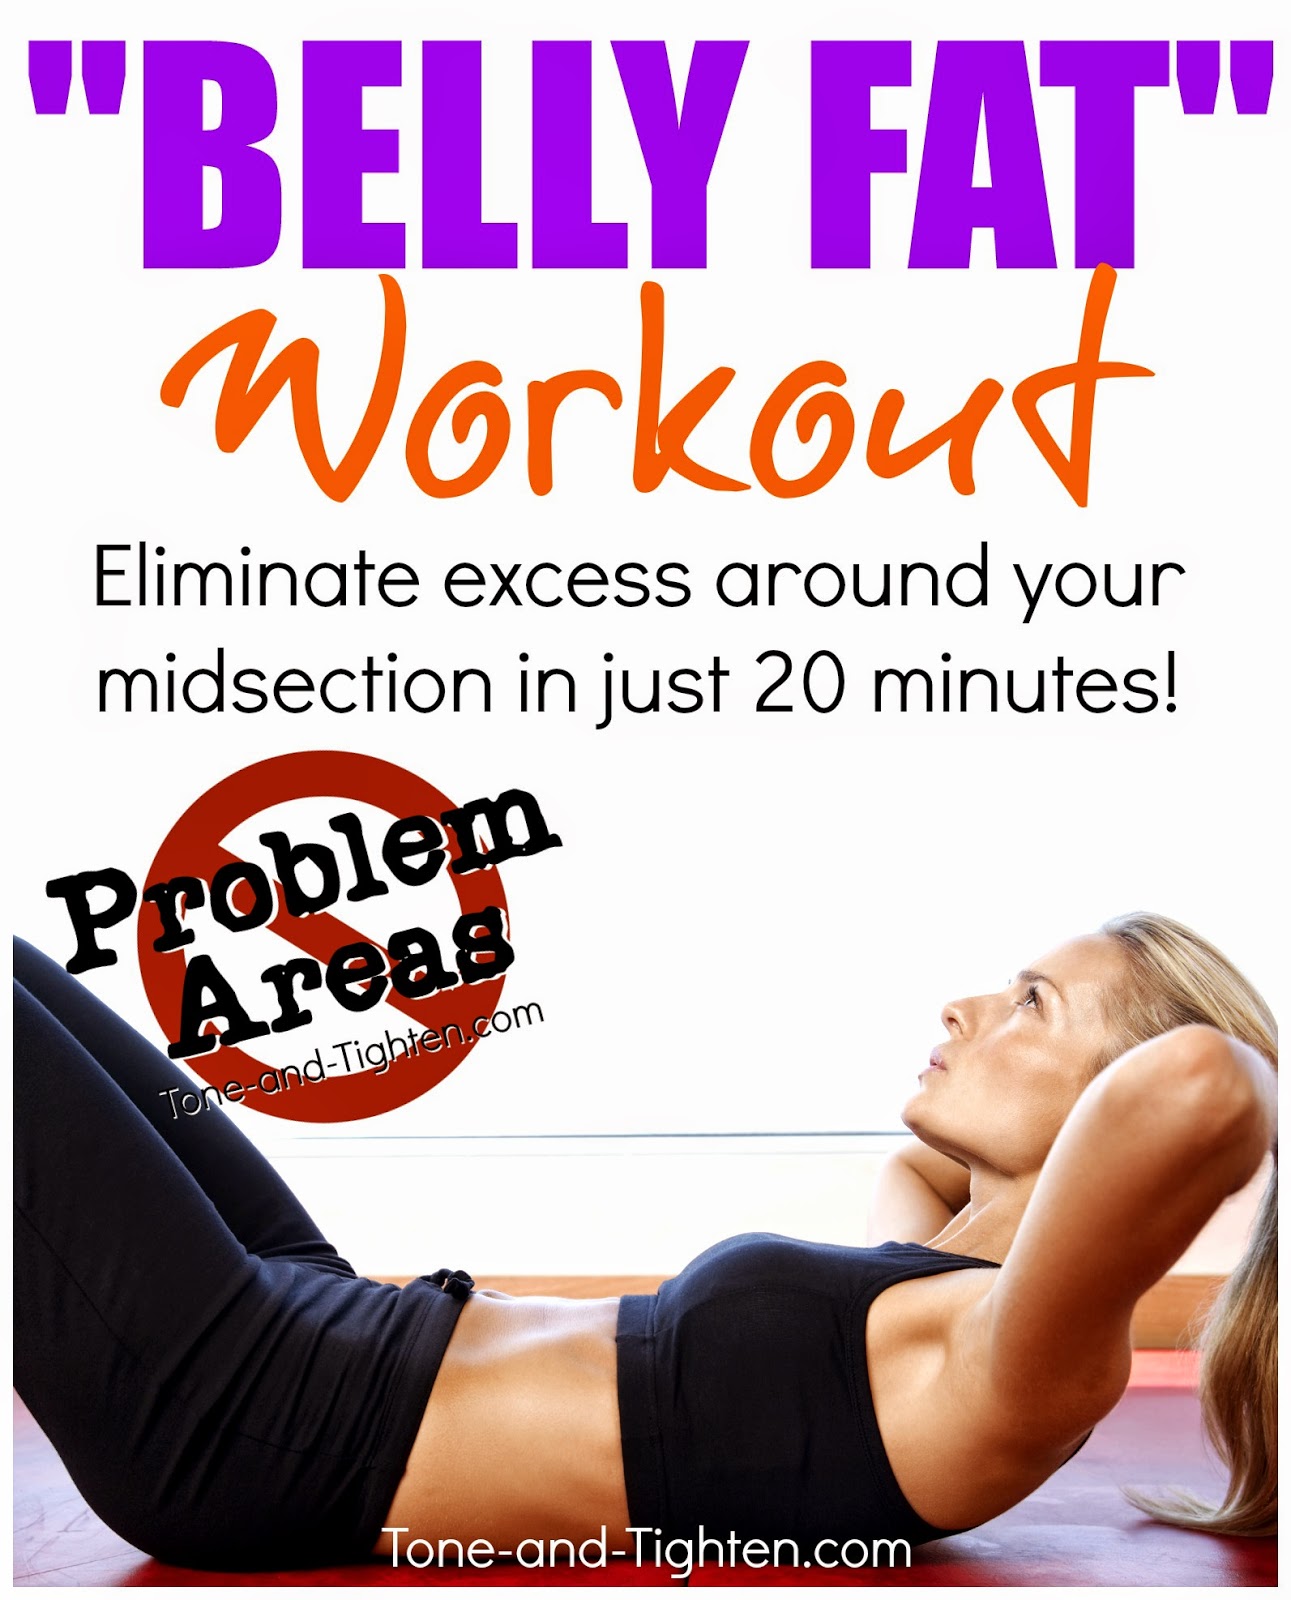 how to get rid of belly fat exercise